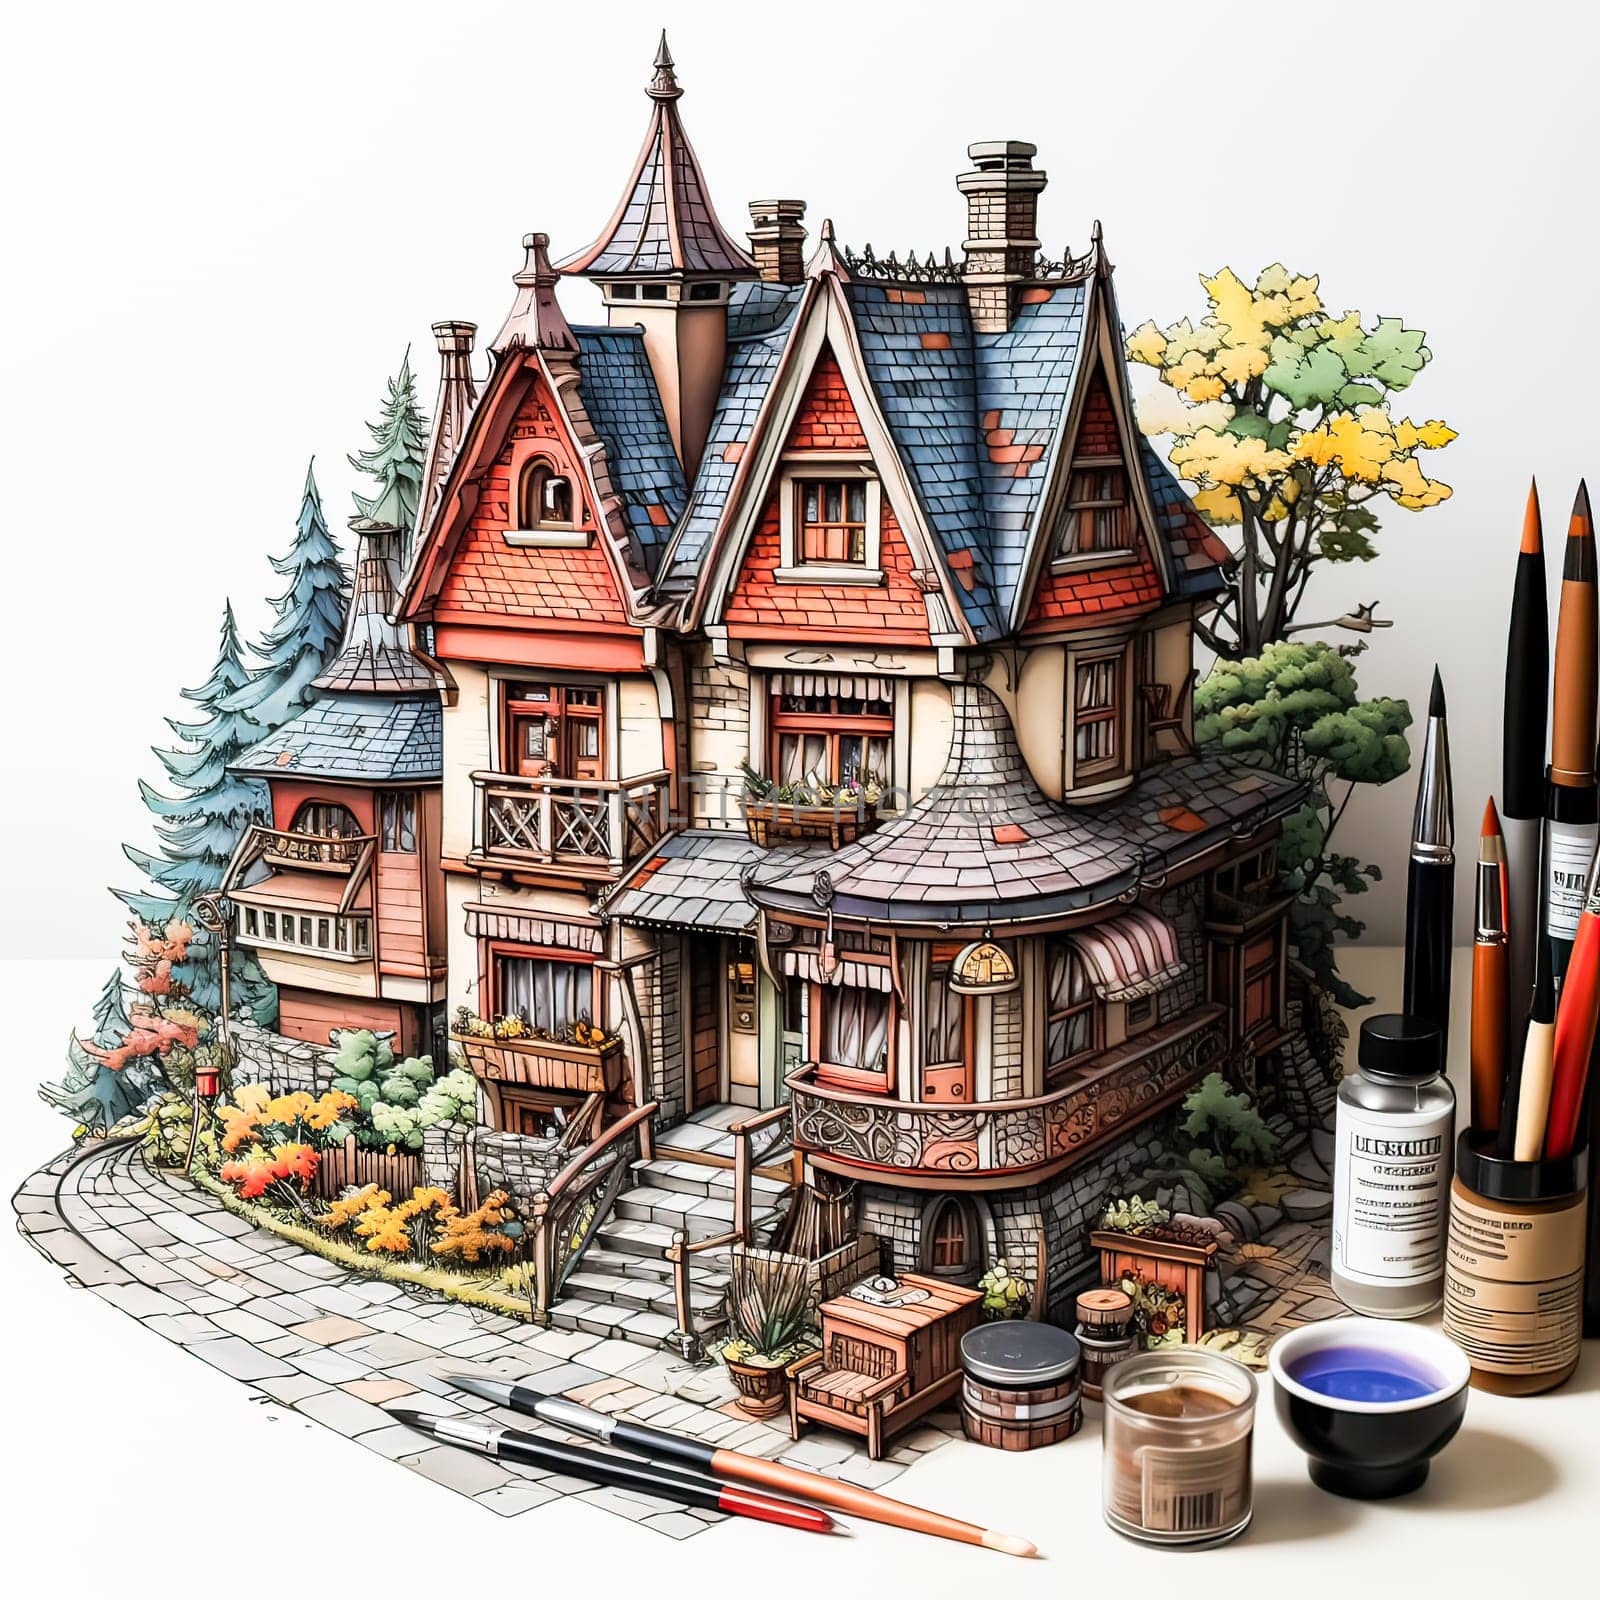 Watercolor art captures the grace of European homes in a picturesque landscape by Alla_Morozova93